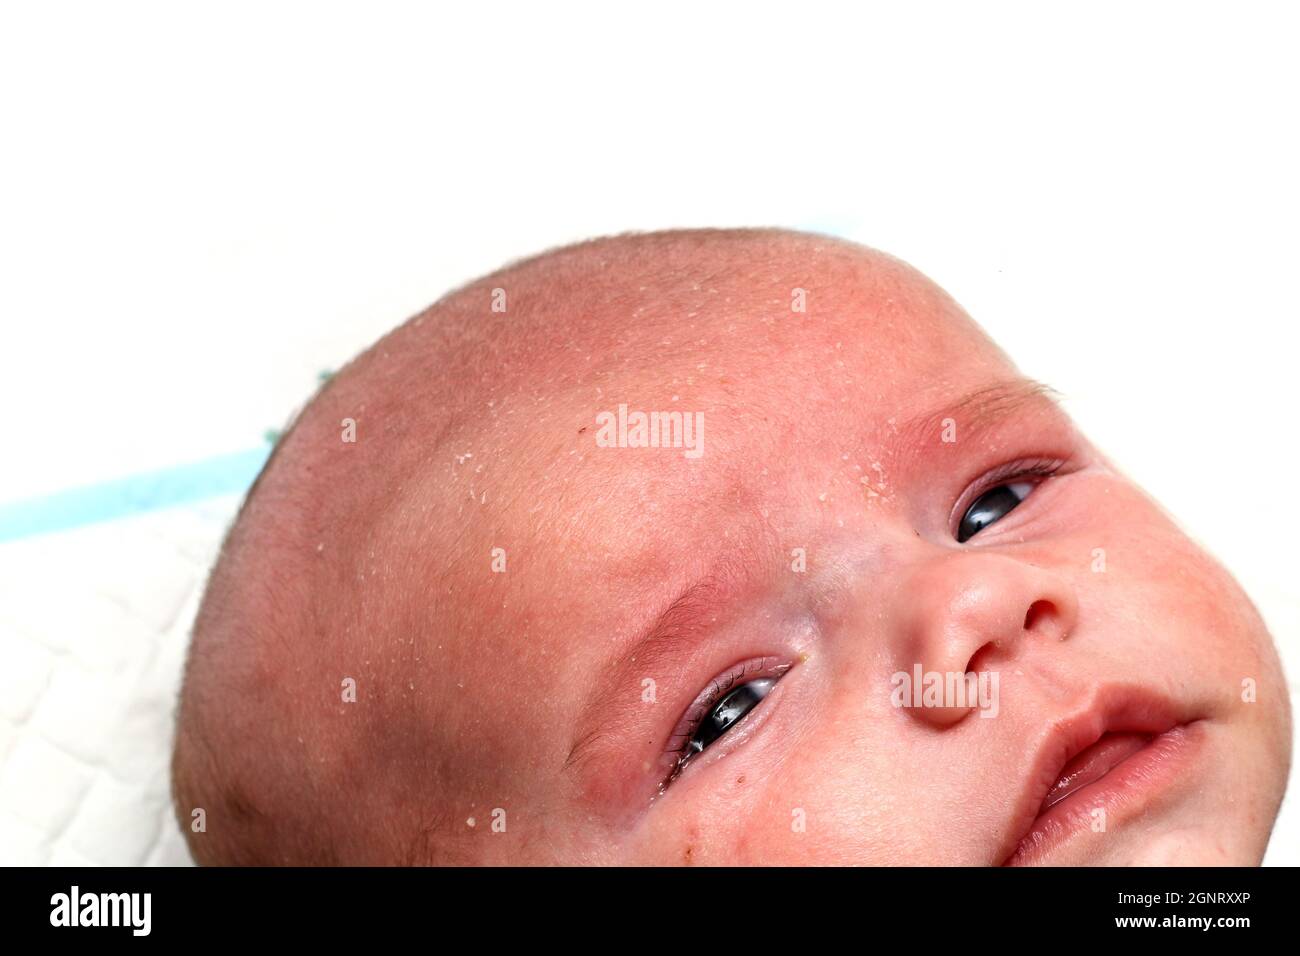 The detail of the head of the unhappy crying newborn baby boy with skin problems. He has seborea and acne. Stock Photo